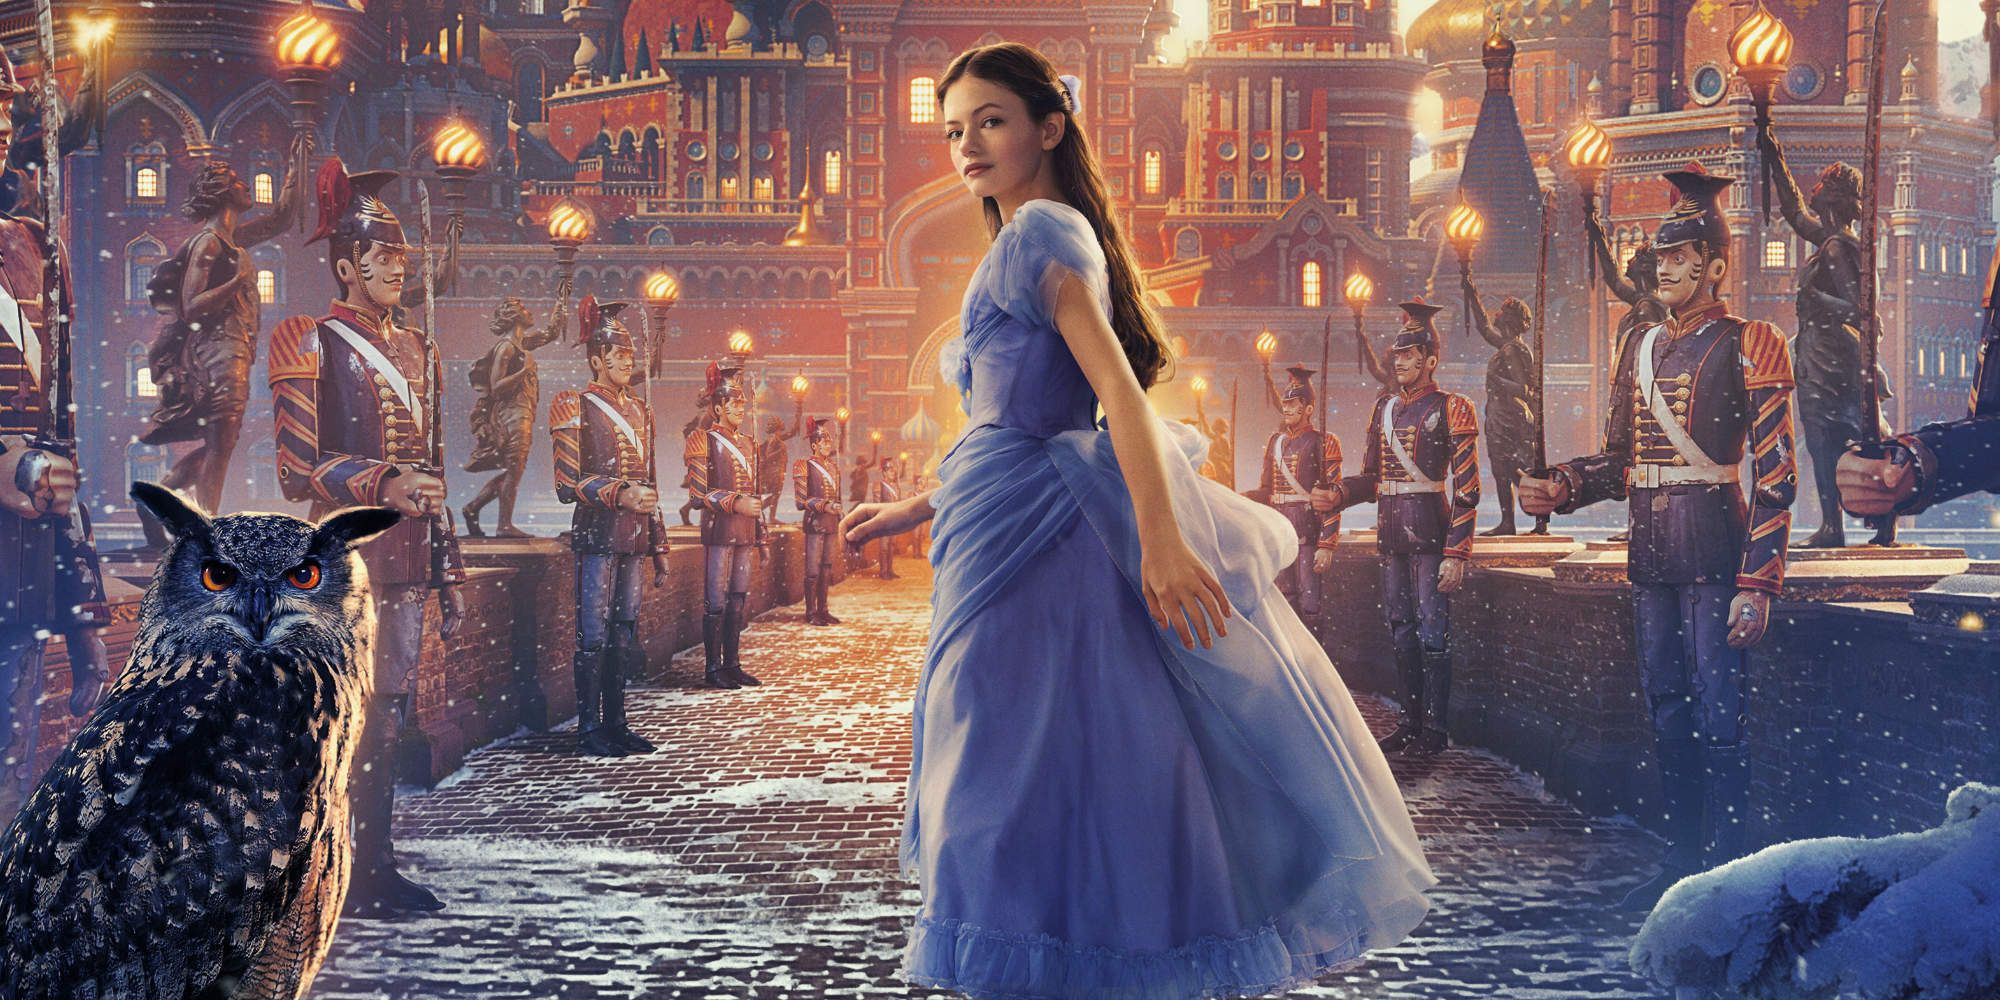 A crop of the poster for The Nutcracker and the Four Realms